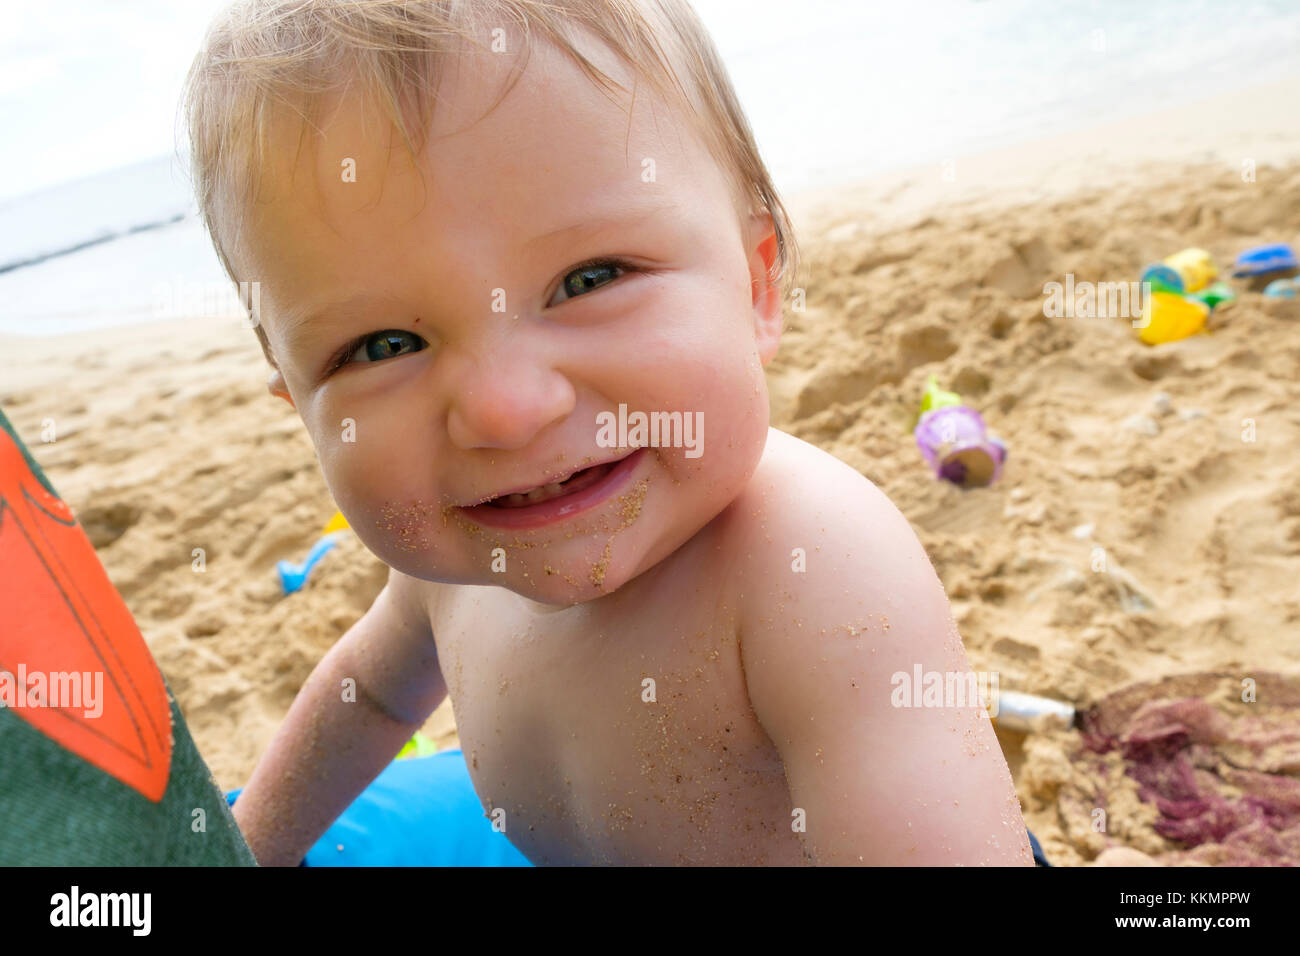 One Year Old On Beach Stock Photo